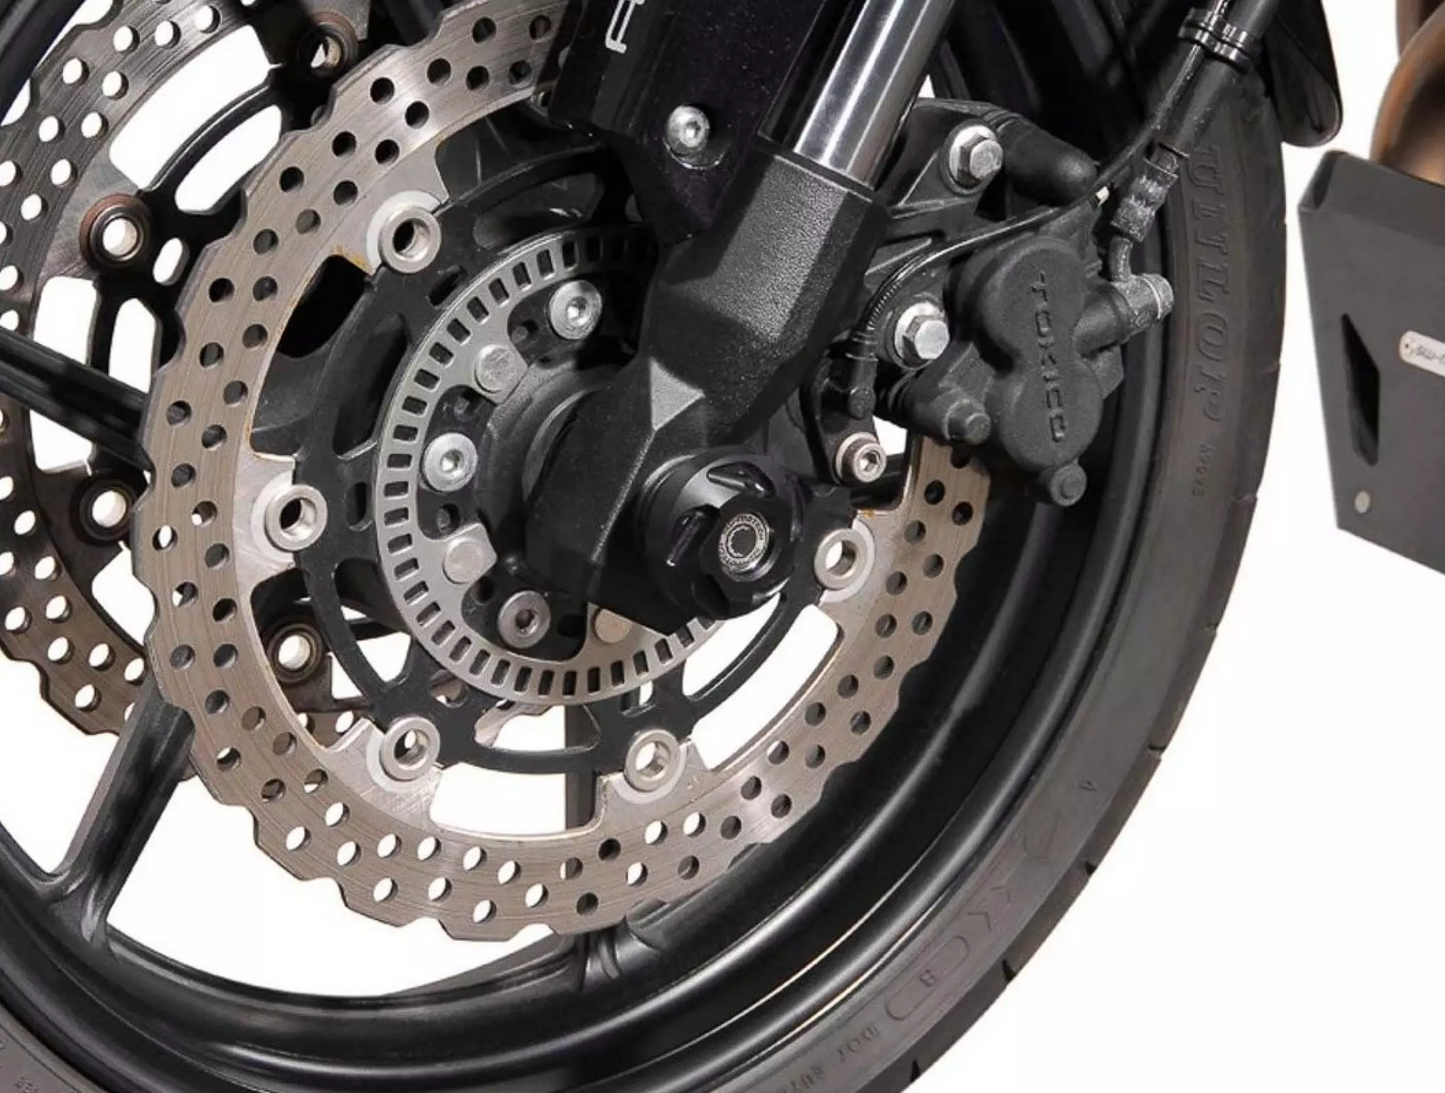 SW Motech Slider Set (Front Axle Black) fits for Kawasaki Versys 650 ('10-'14) - Durian Bikers